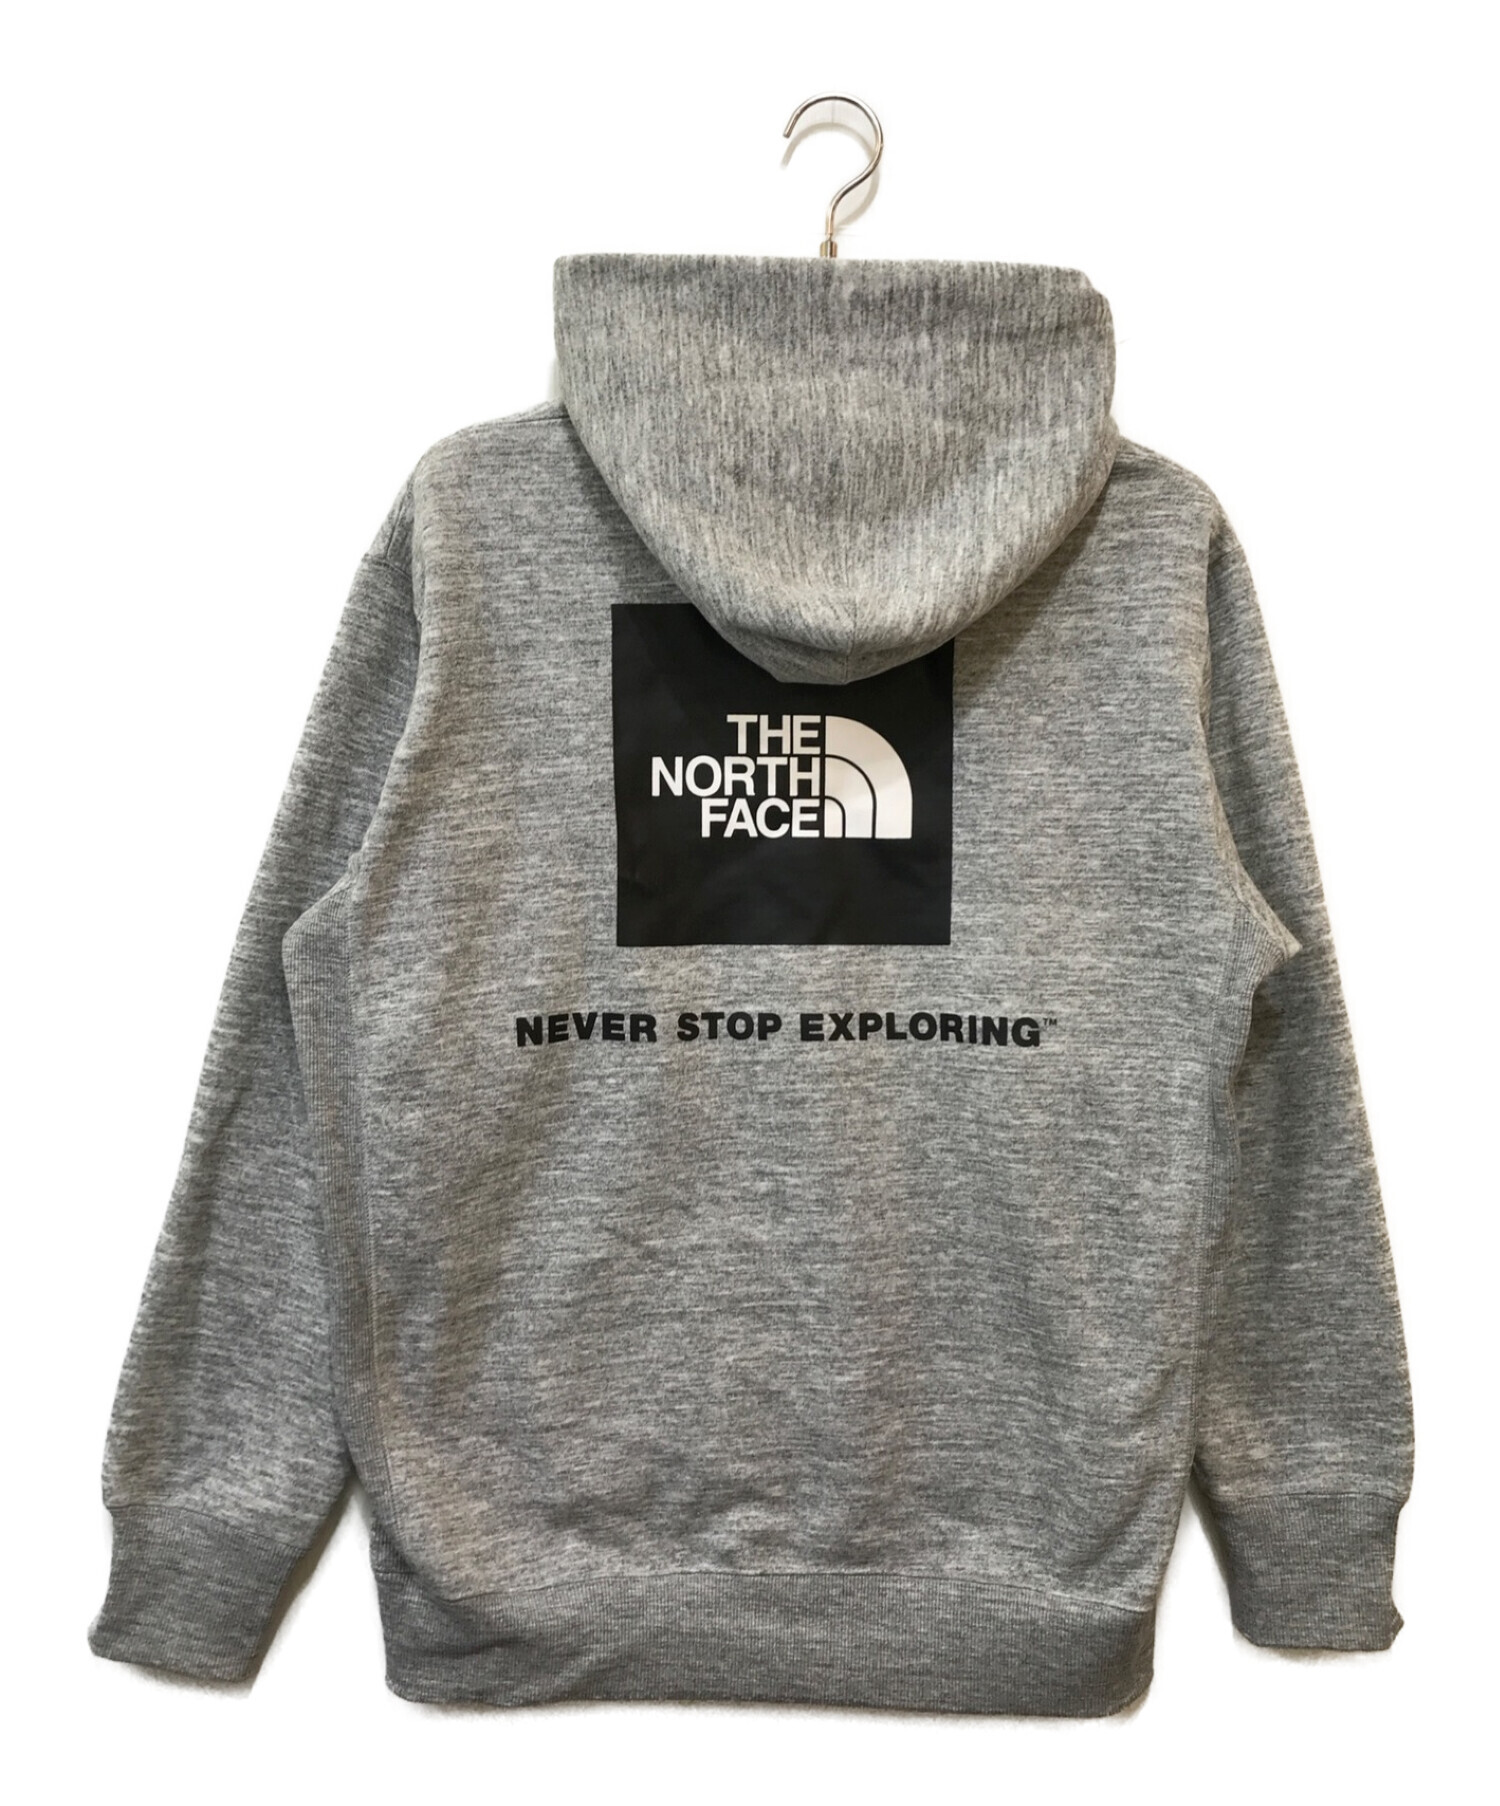 XL The North Face Square Logo Hoodieメンズ - パーカー